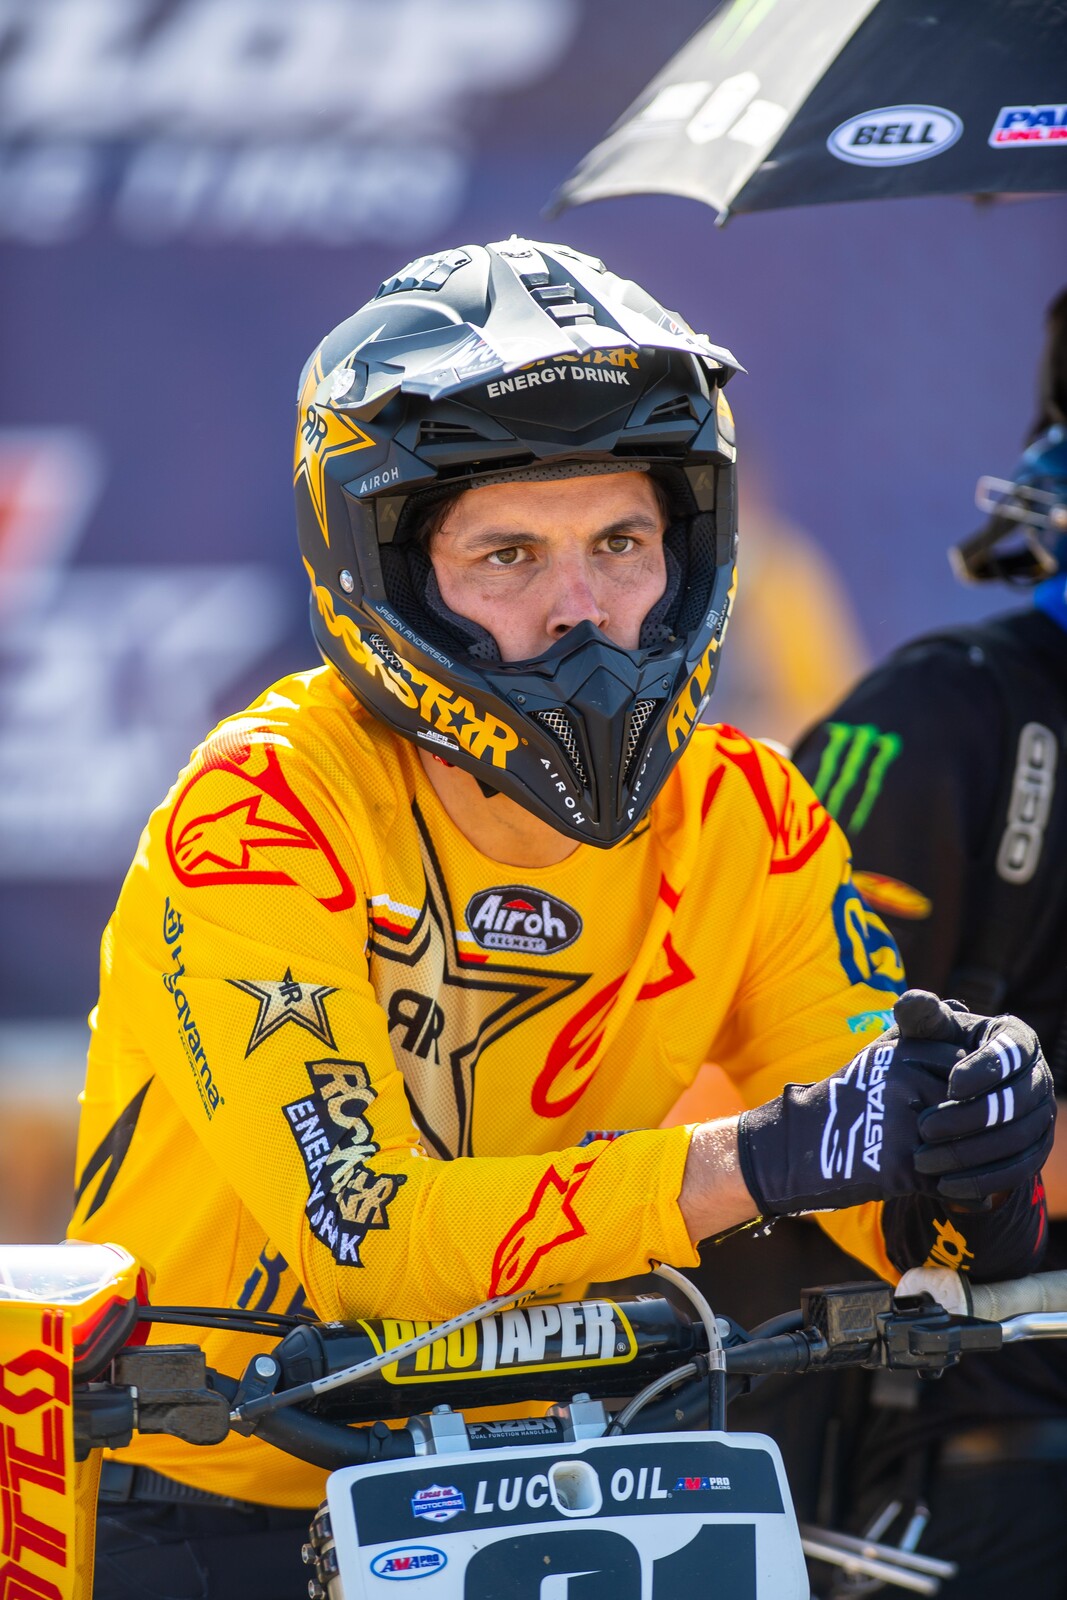 Jason Anderson Would Have Won A1 Had His Jersey Untucked - Racer X